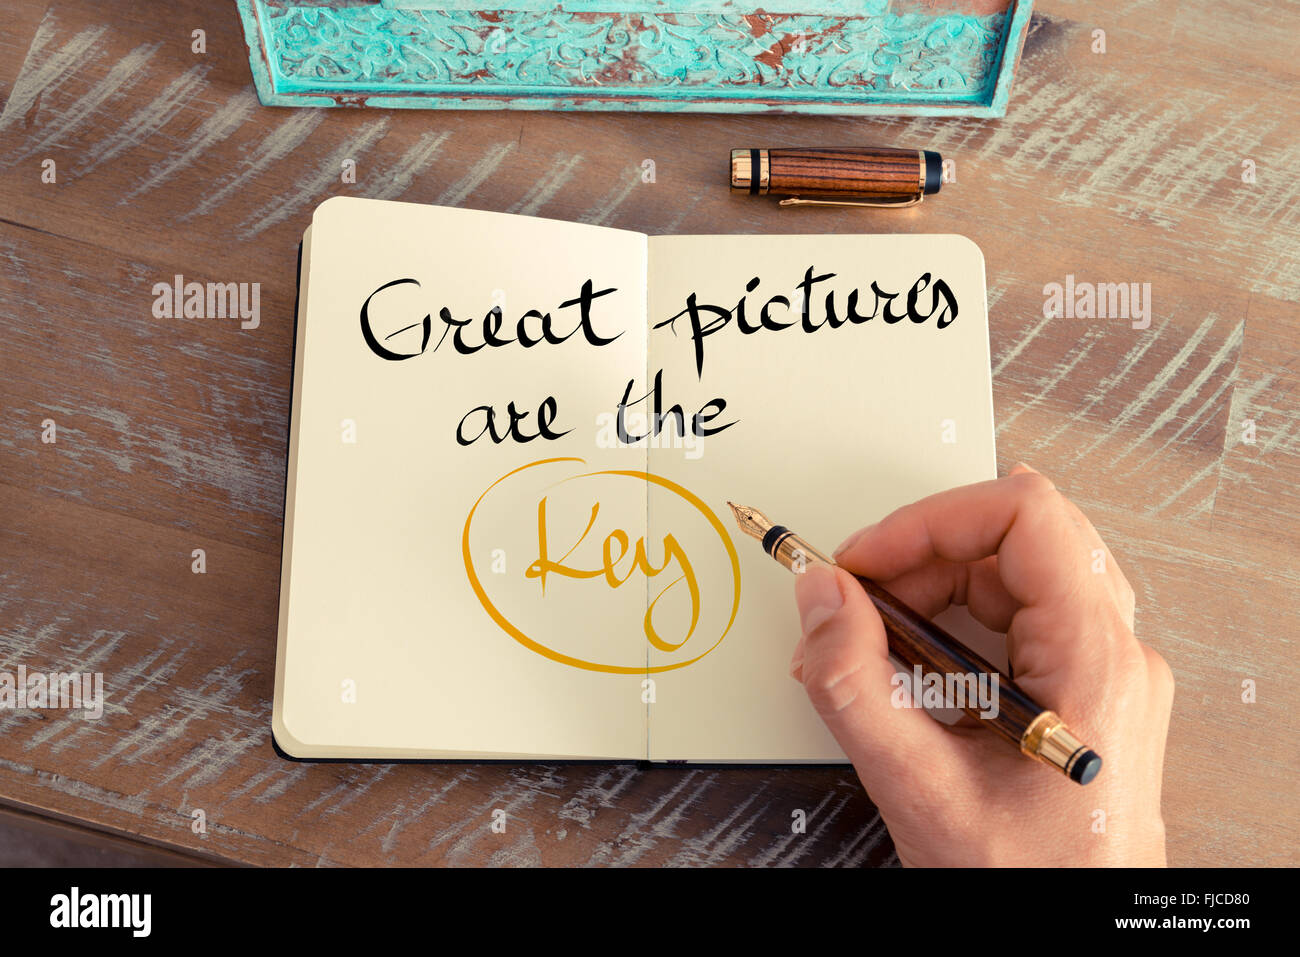 Handwritten text Great Pictures Are The Key as business concept image Stock Photo